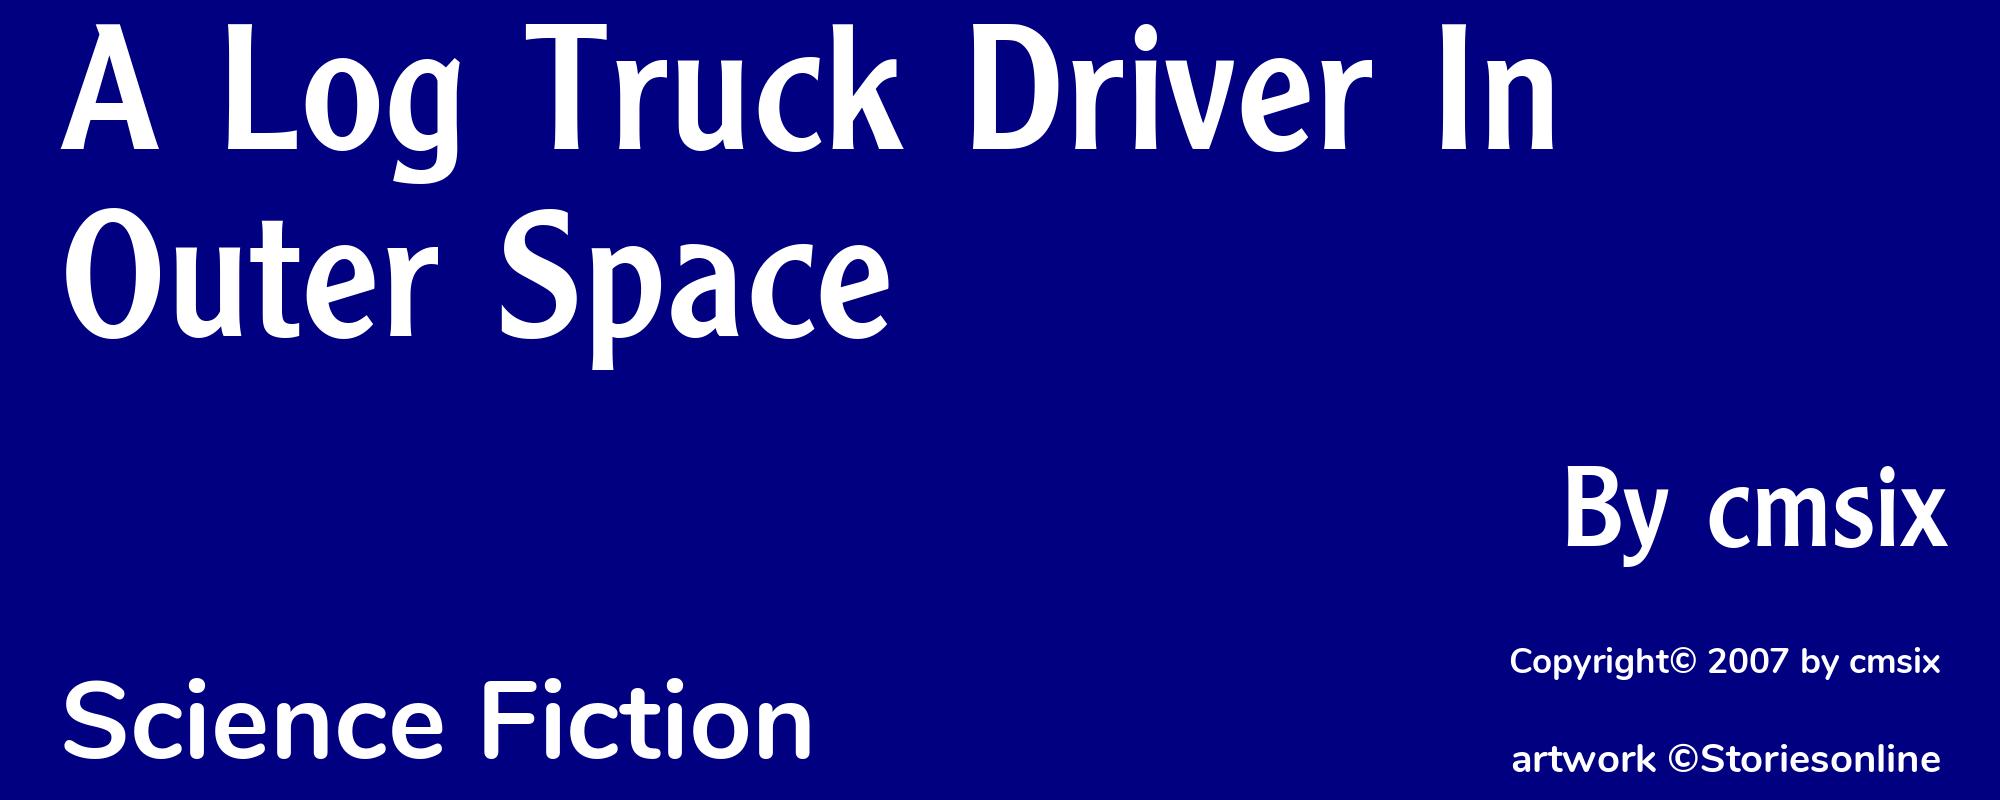 A Log Truck Driver In Outer Space - Cover